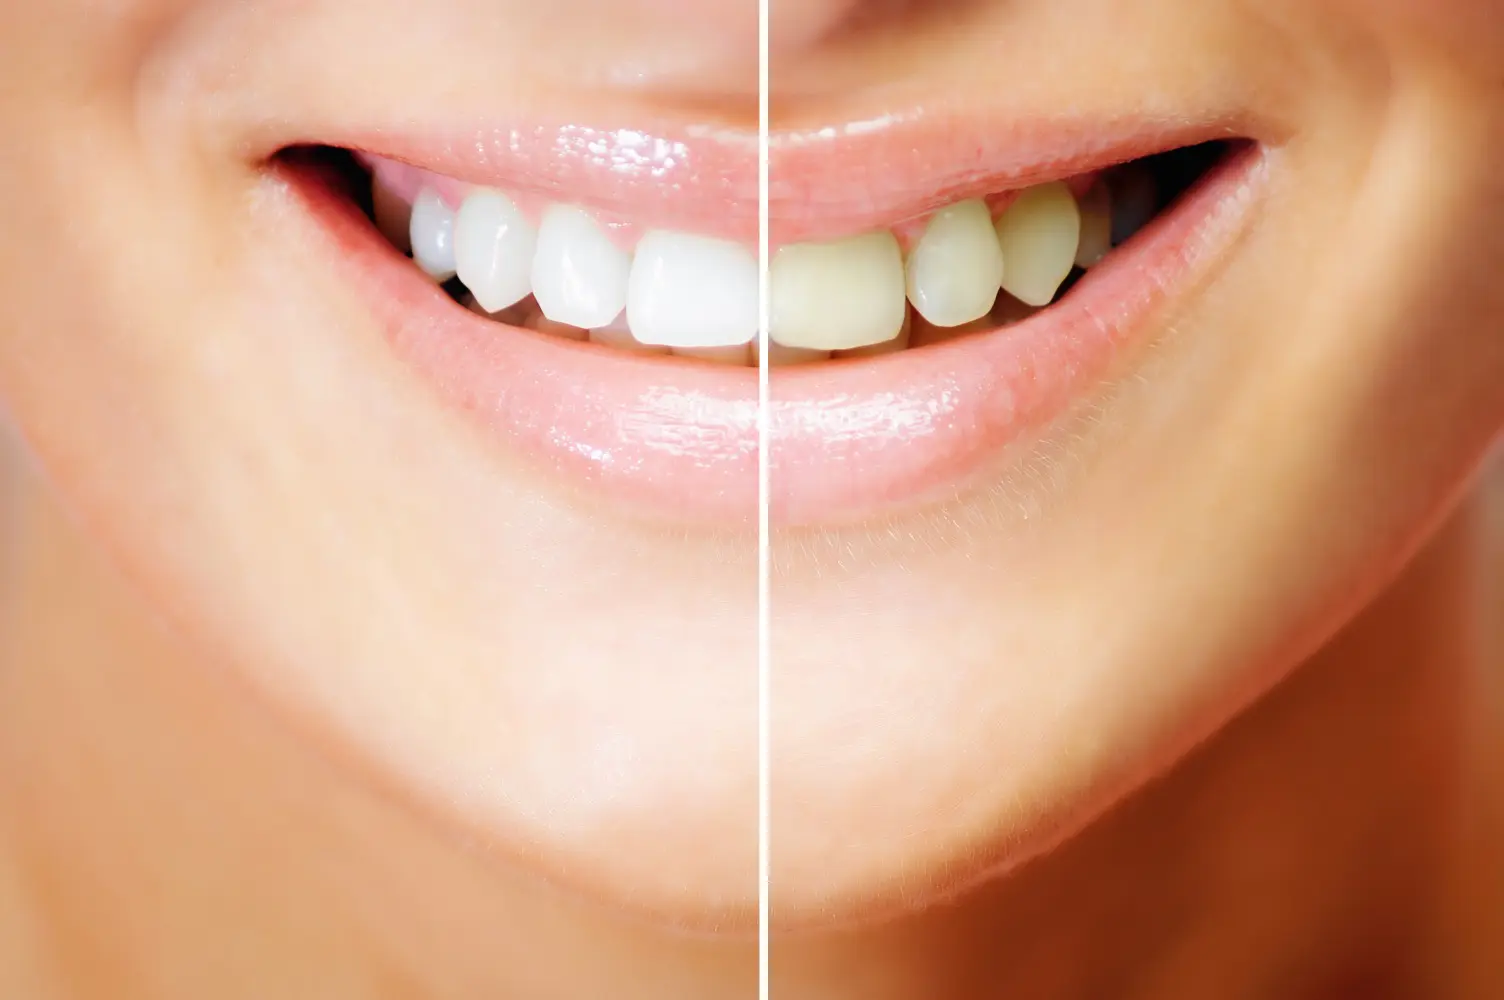 How Does Tooth Whitening In Bellevue Works?